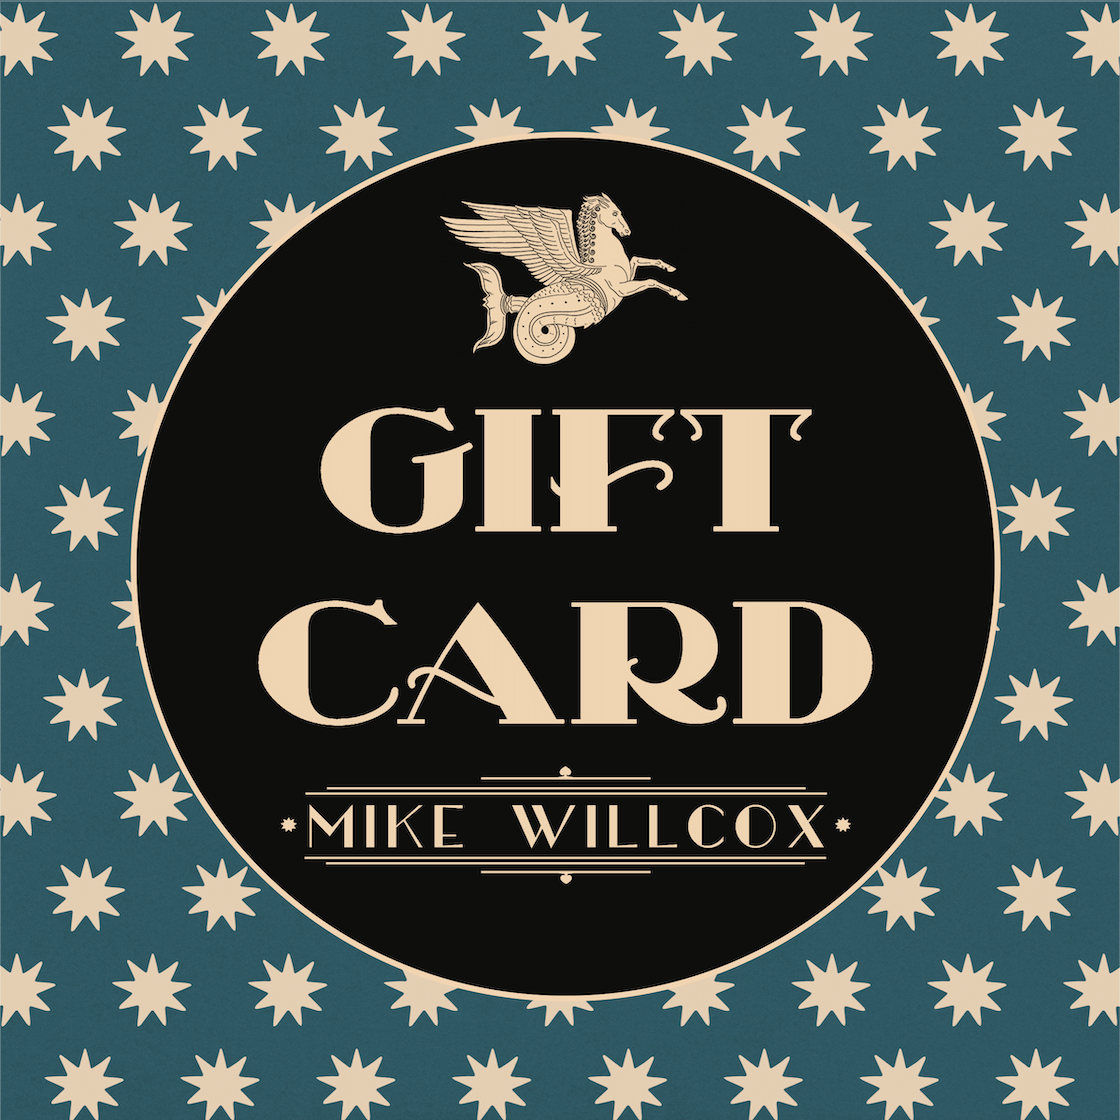 Gift Card - Mike Willcox